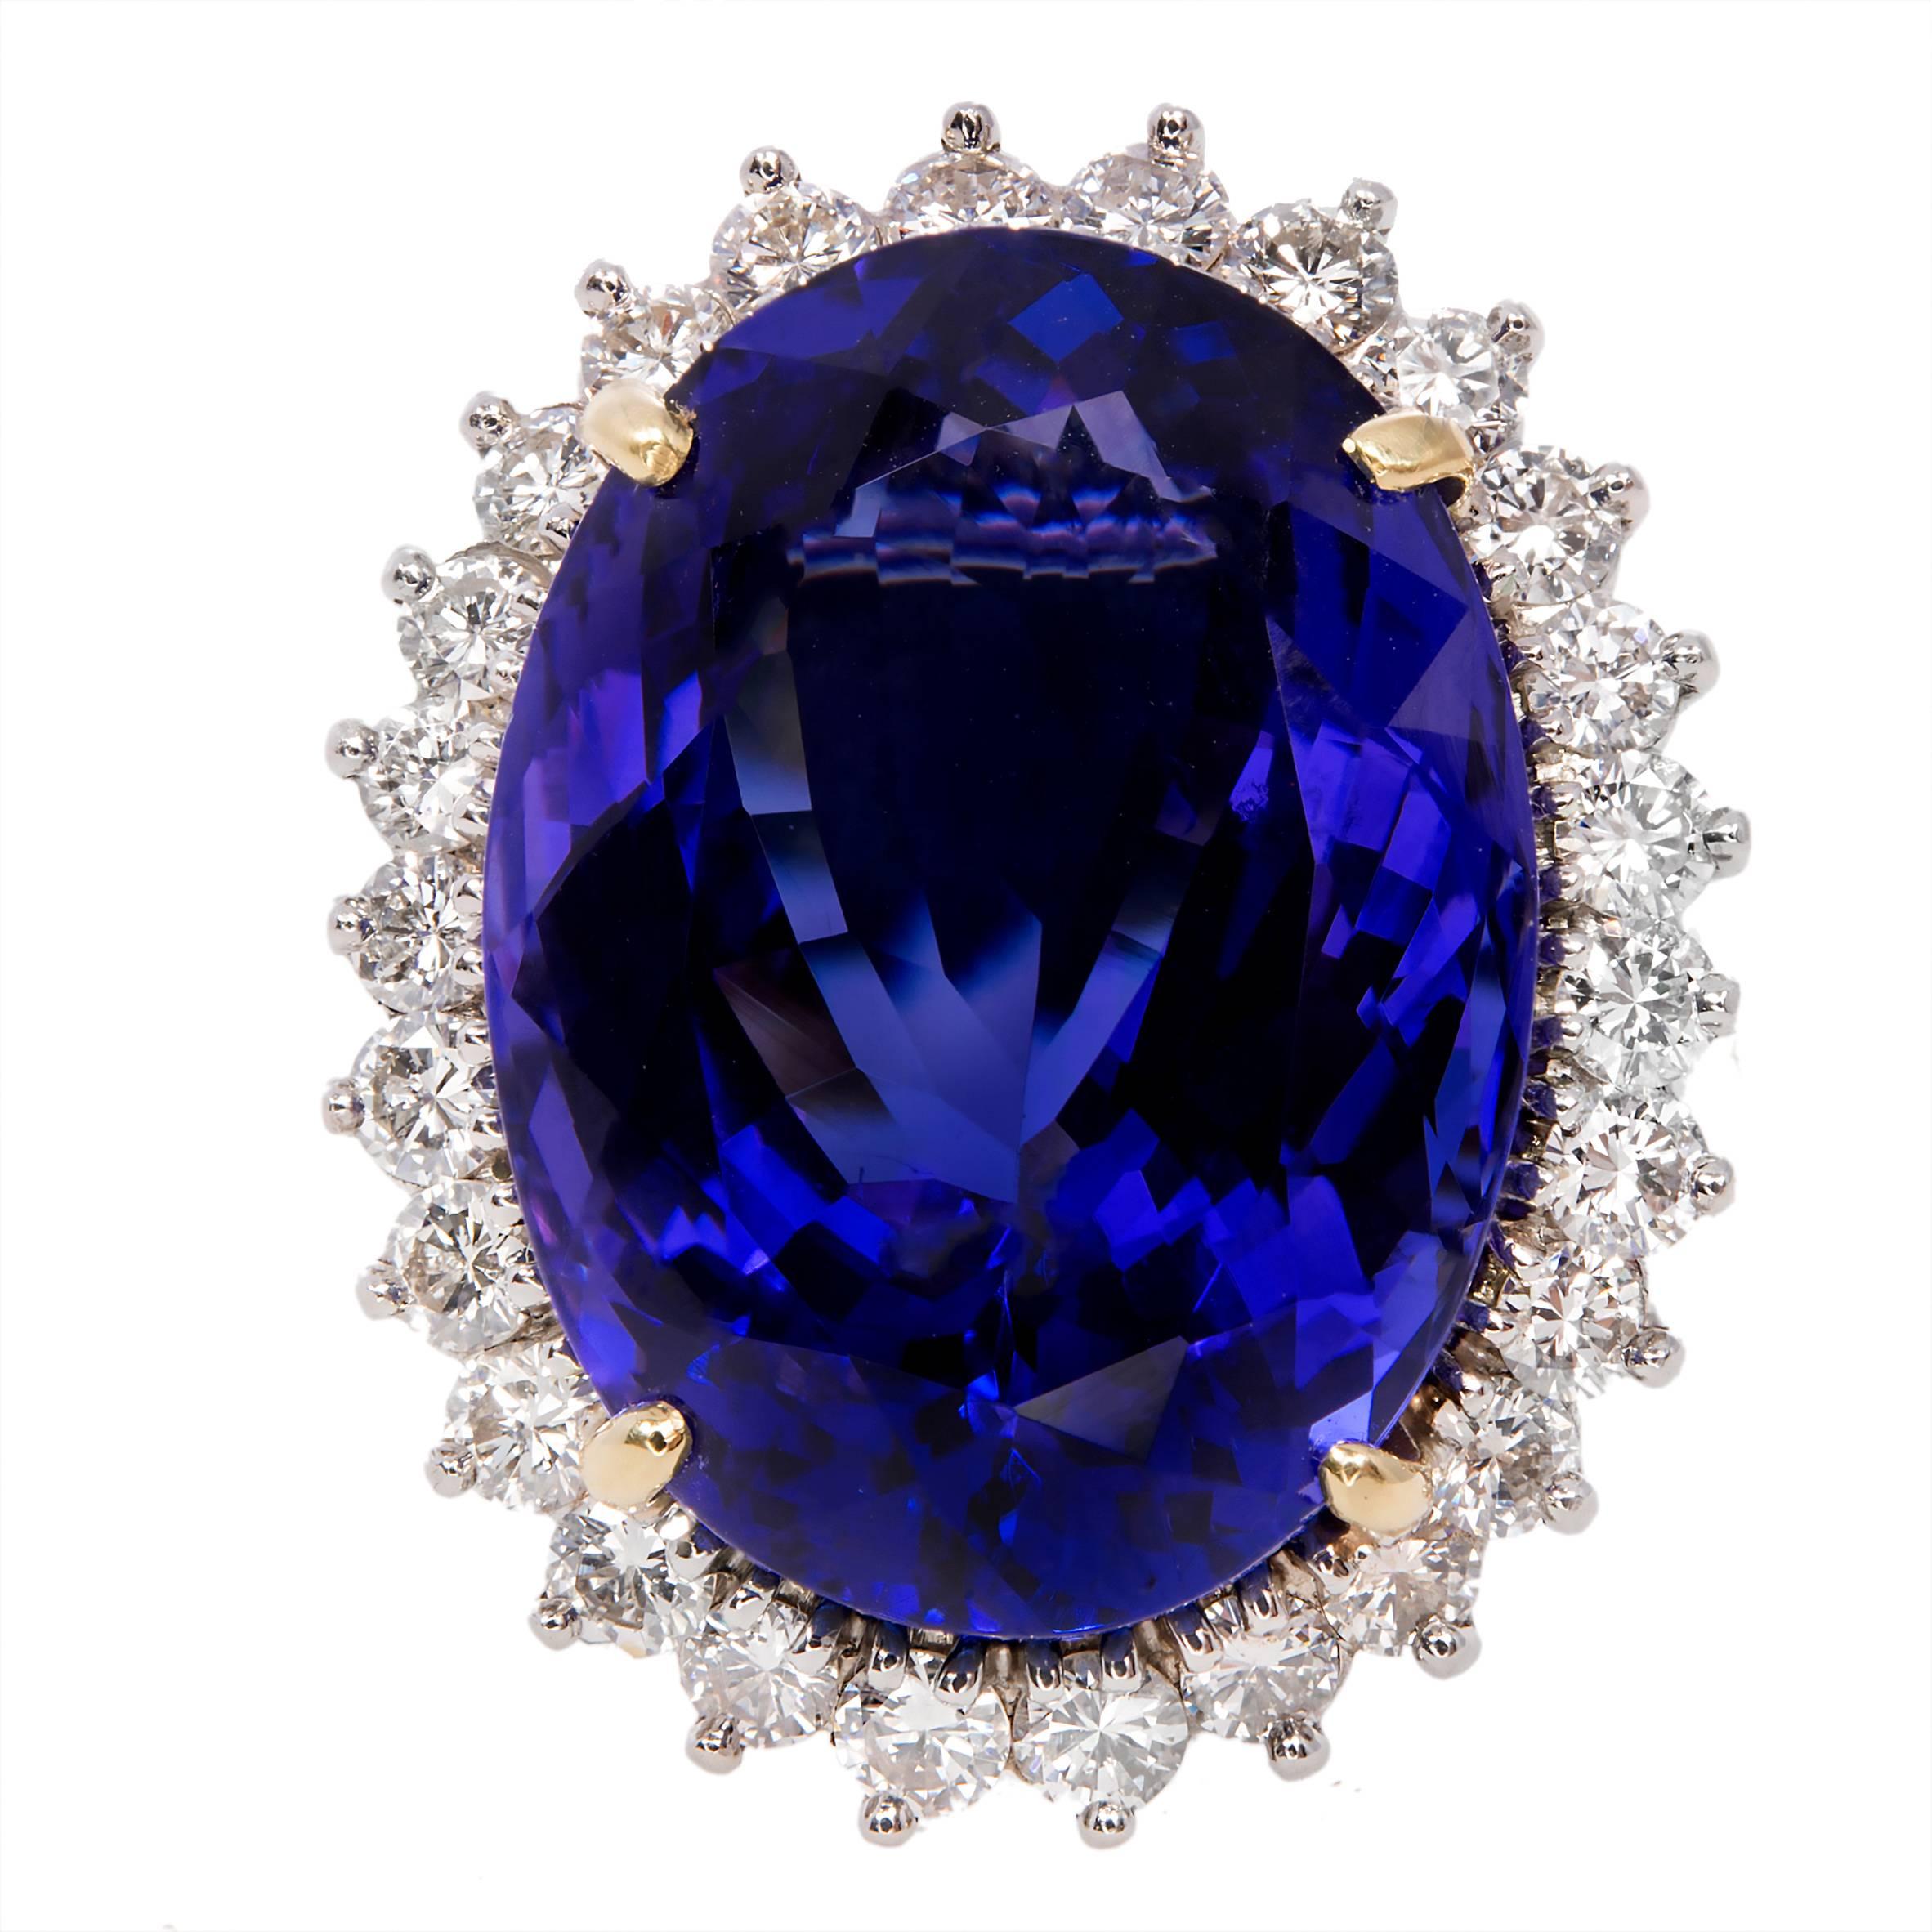 Tanzanite and diamond cocktail ring. 20.51 carat oval blue/purple center stone with a halo of 26 round diamonds in a 18k yellow gold setting.  Circa 1970 

1 oval purplish blue Tanzanite, approx. total weight 20.51cts, VS, 19.98 x 9.5 x 14.7mm
26